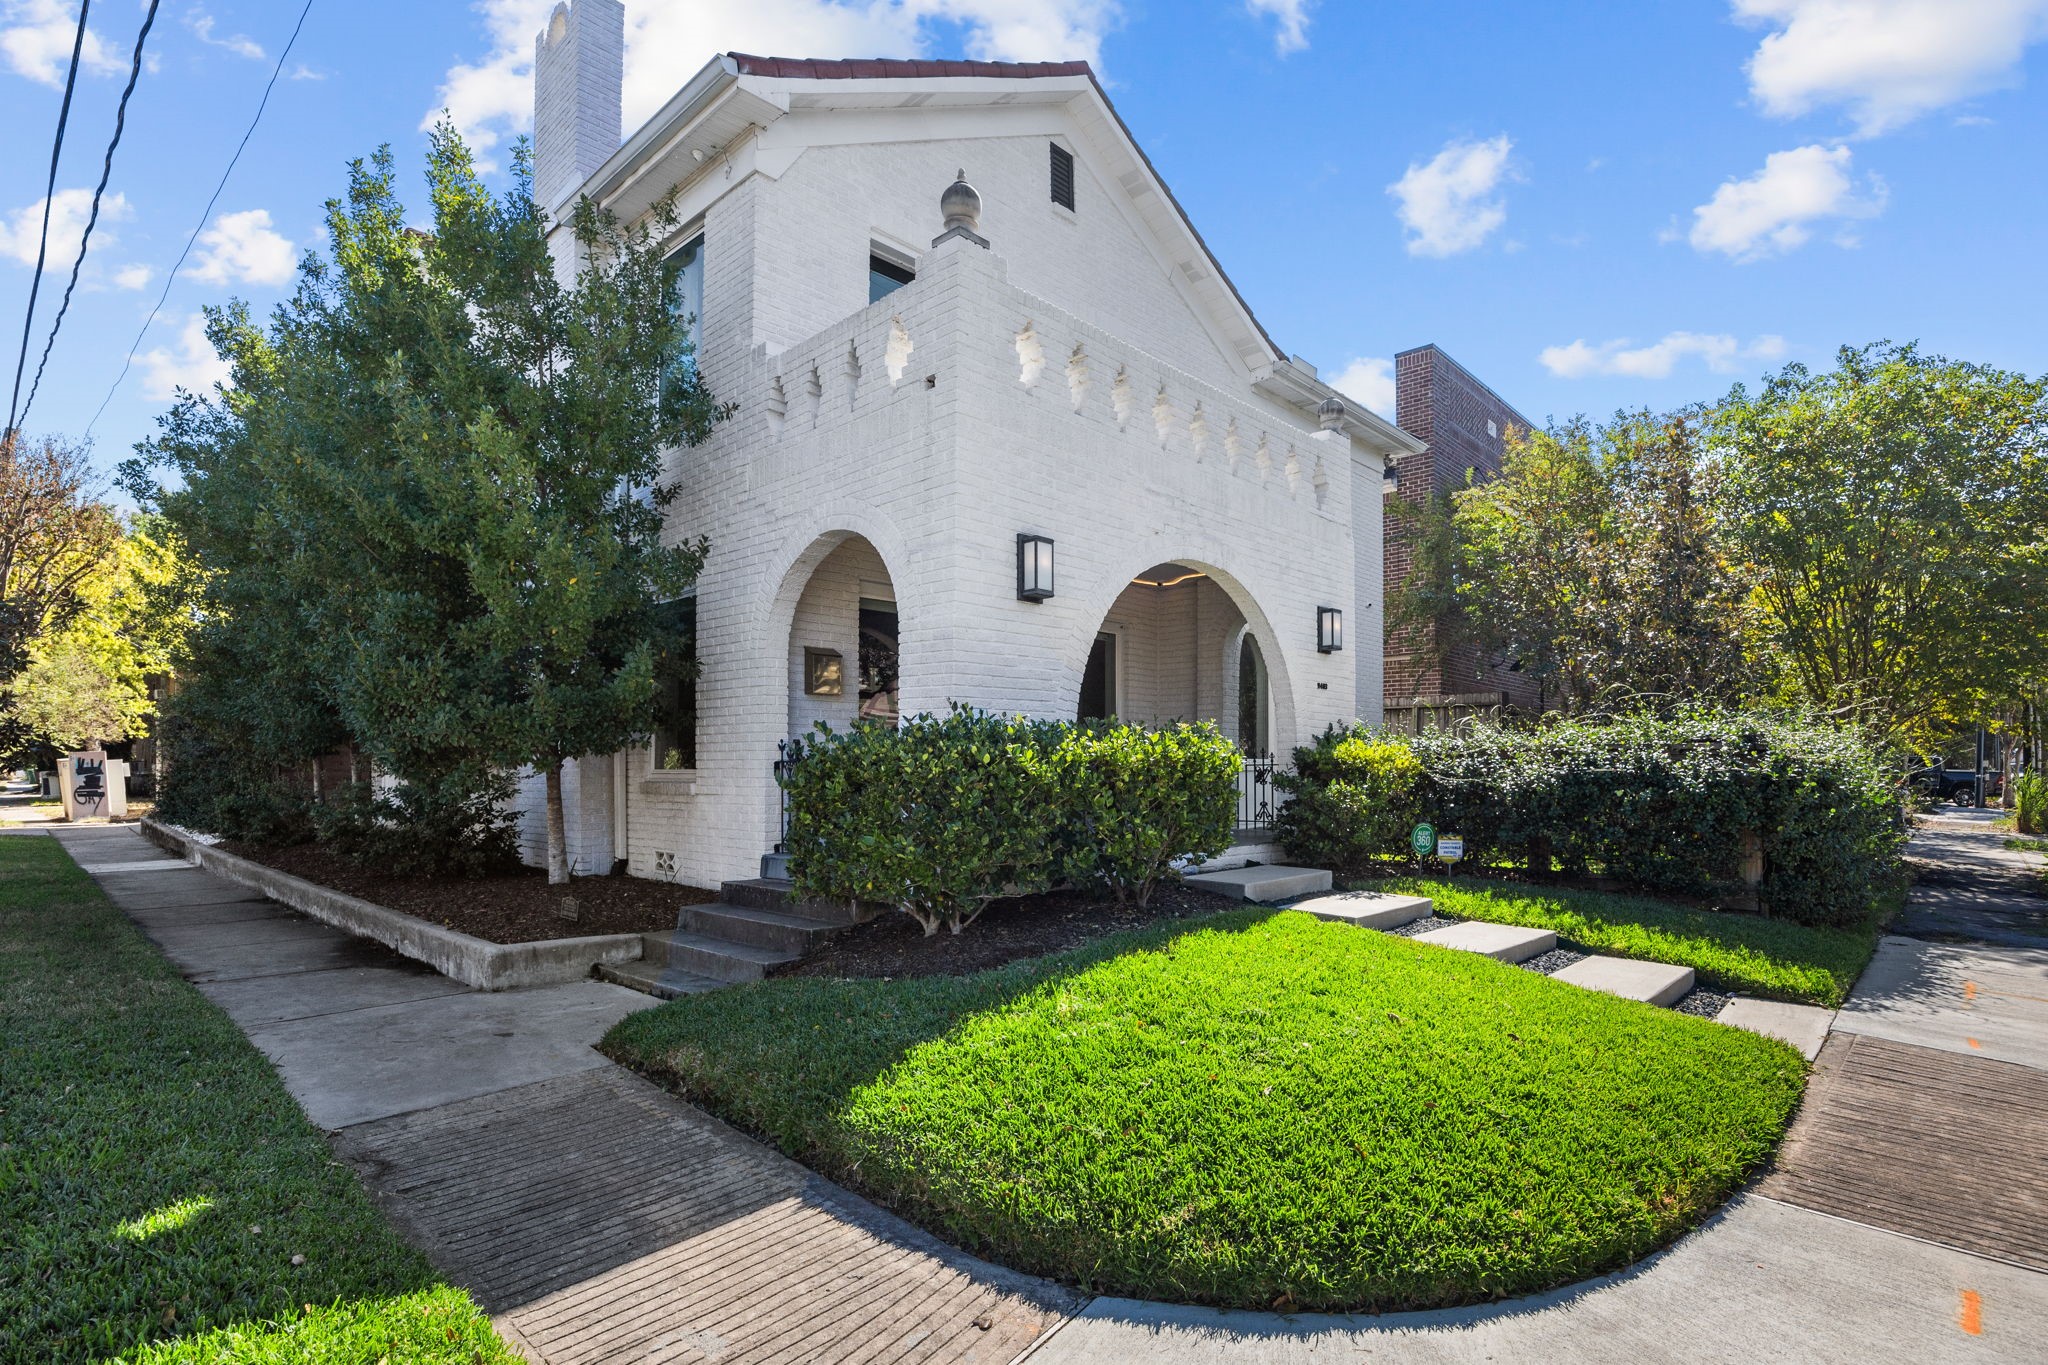 Gorgeous 1930s historic home straddling the River Oaks Shopping Area and Montrose, within walking distance to unbelievable restaurants, shops, and more.